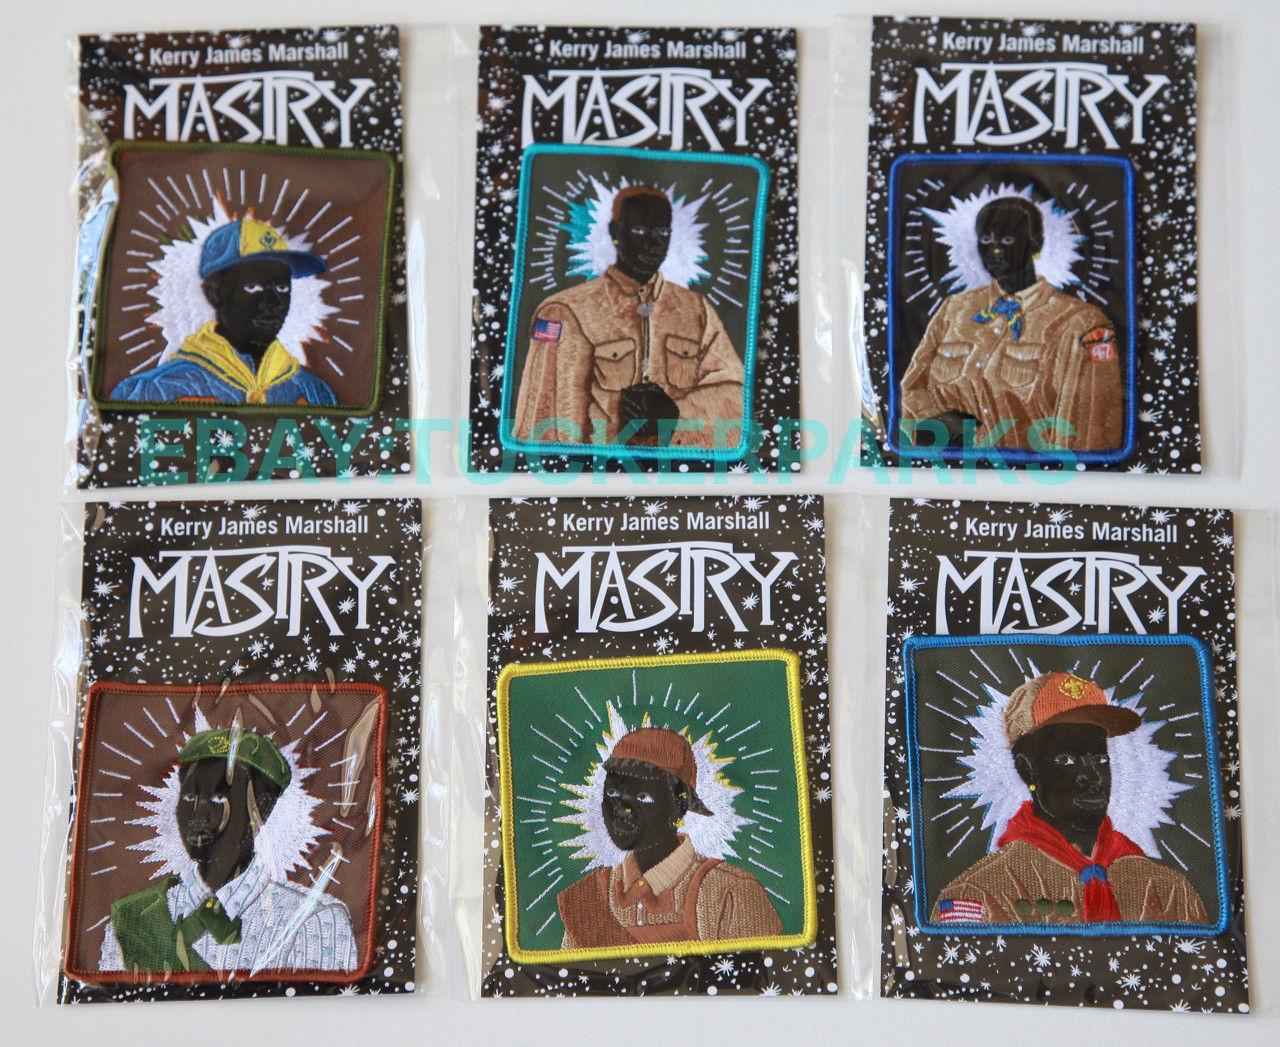 KERRY JAMES MARSHALL
Set of Six (Six) Scout Series Embroidered Patches, 2017
Rayon thread on poly twill backed embroidered patches, set of six. Brand new in original packaging.
Largest 4.125